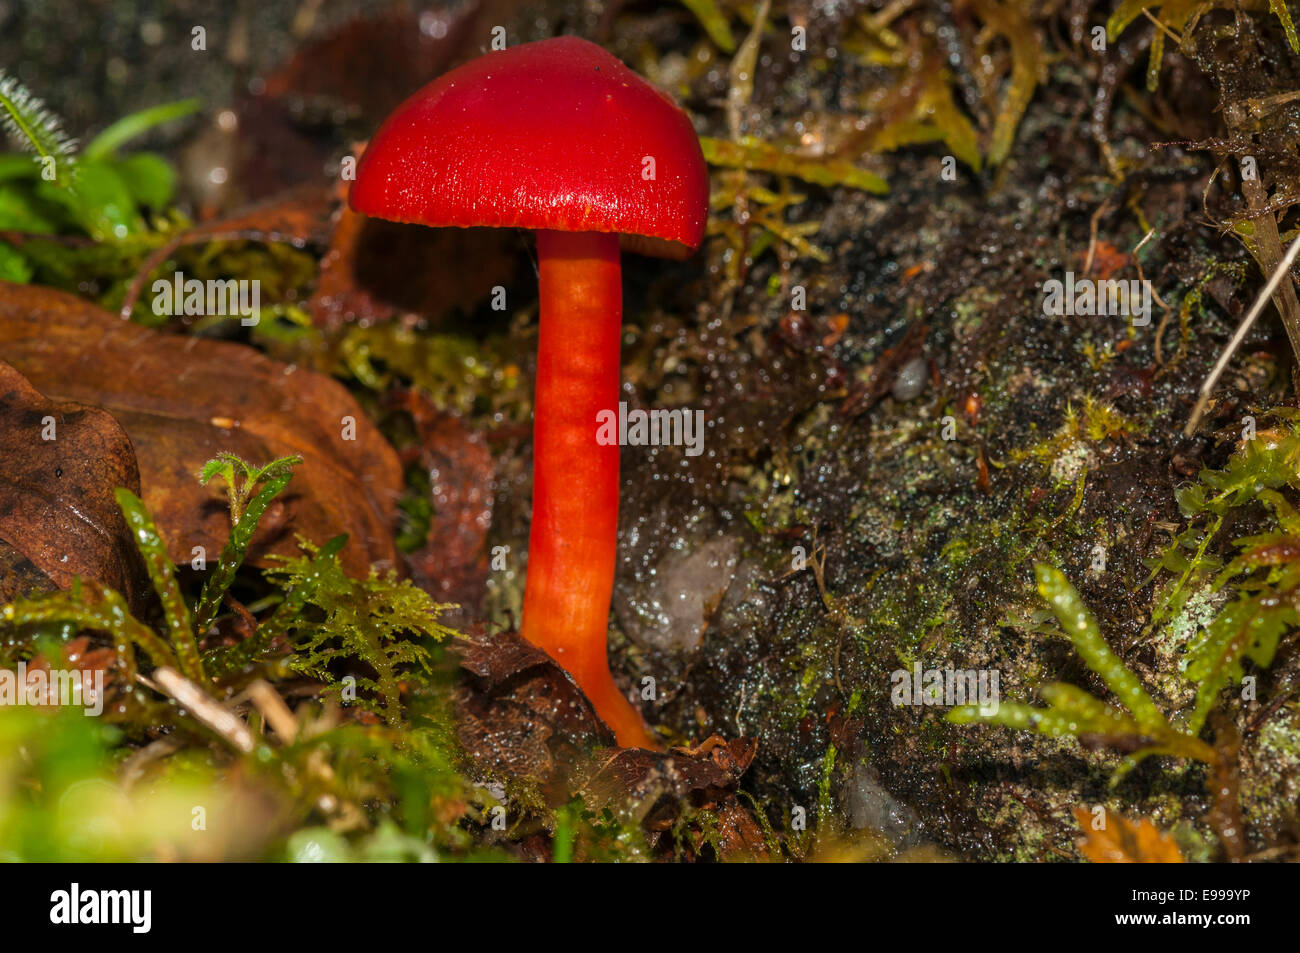 A photograph taken with a flash of a specimen of Scarlet Waxcap, Hygrocybe coccinea, I think. Stock Photo